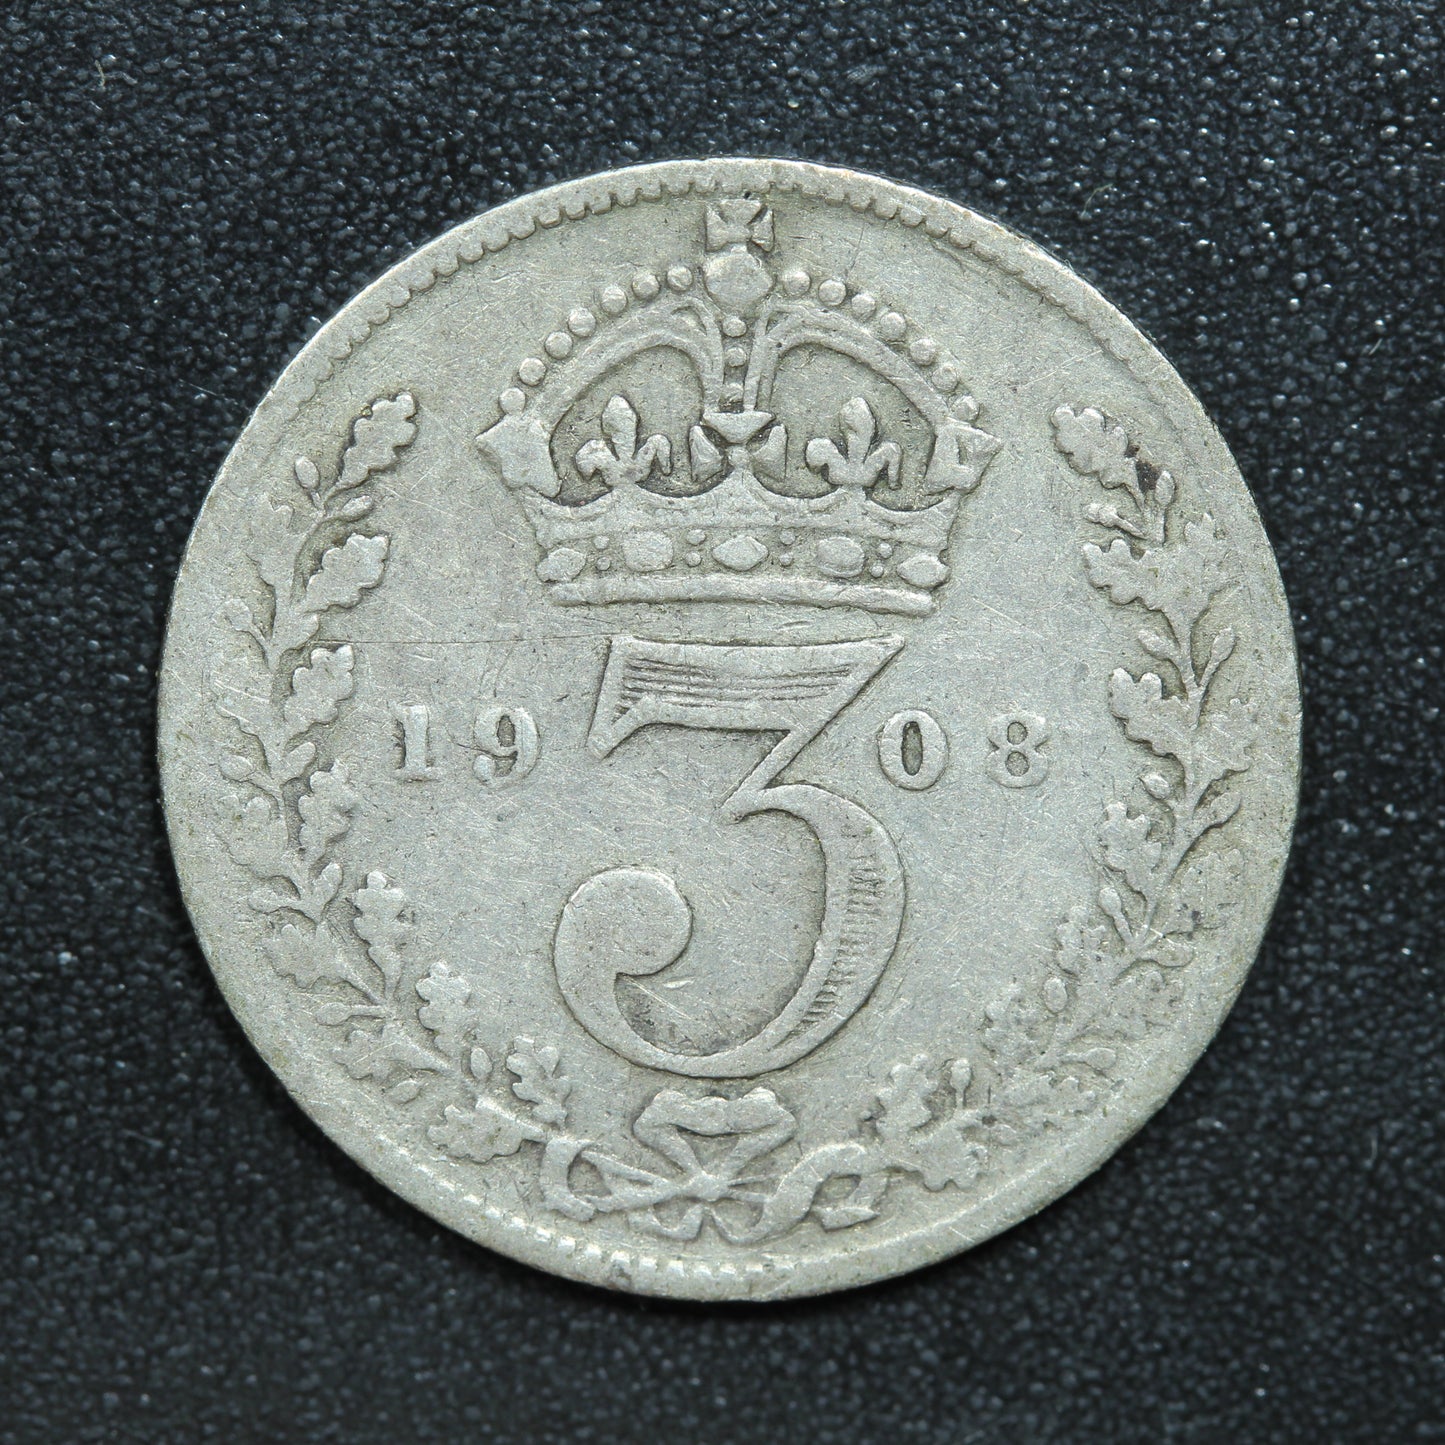 1908 Great Britain 3 Pence Threepence Silver Coin - KM# 797.2